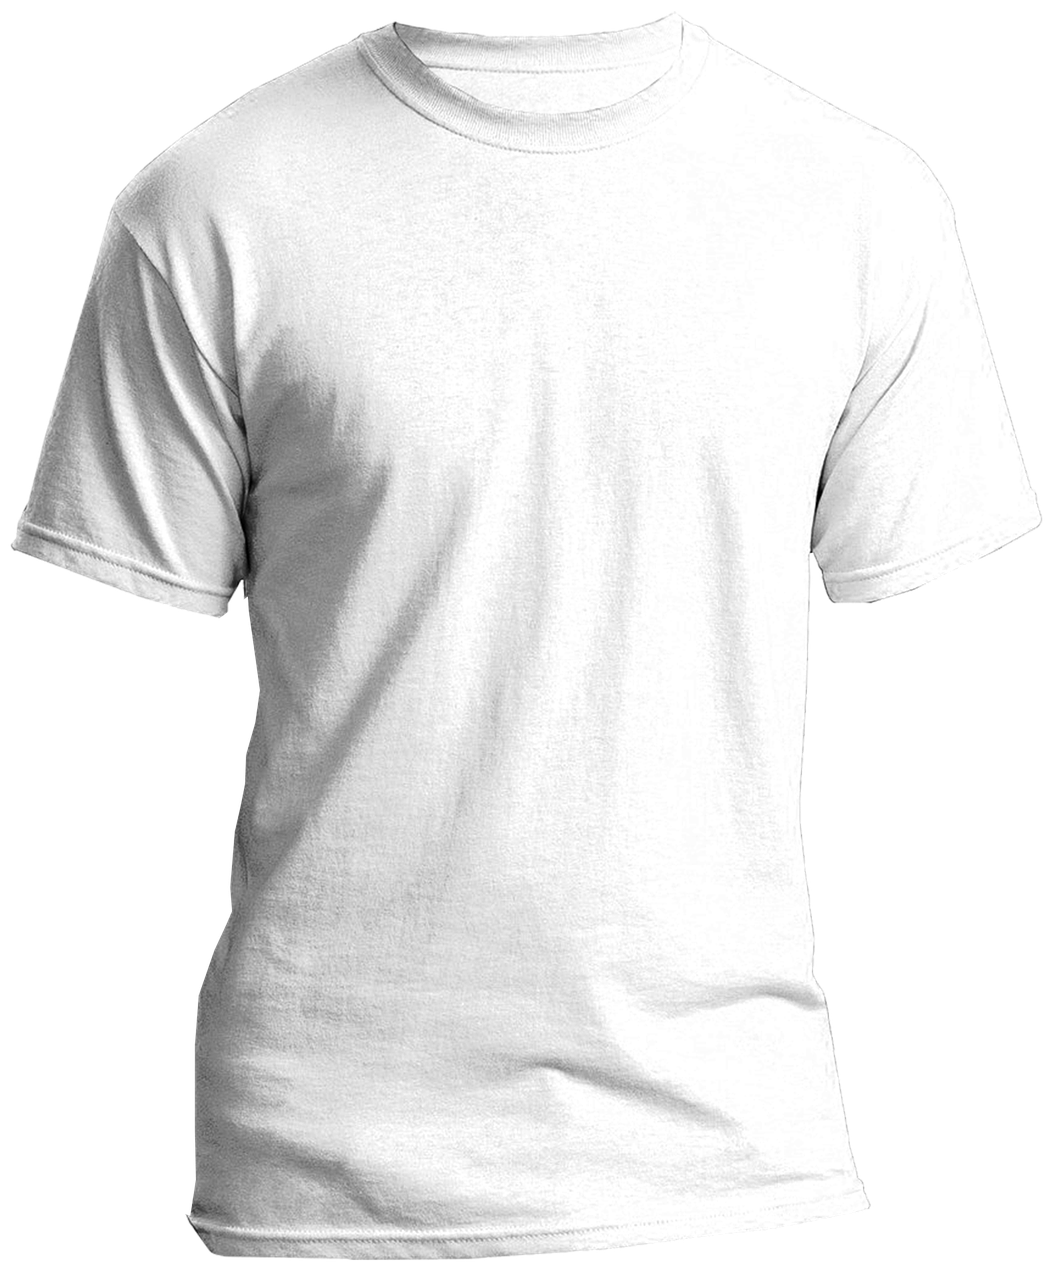 Download free photo of Blank t shirts white t shirt template template